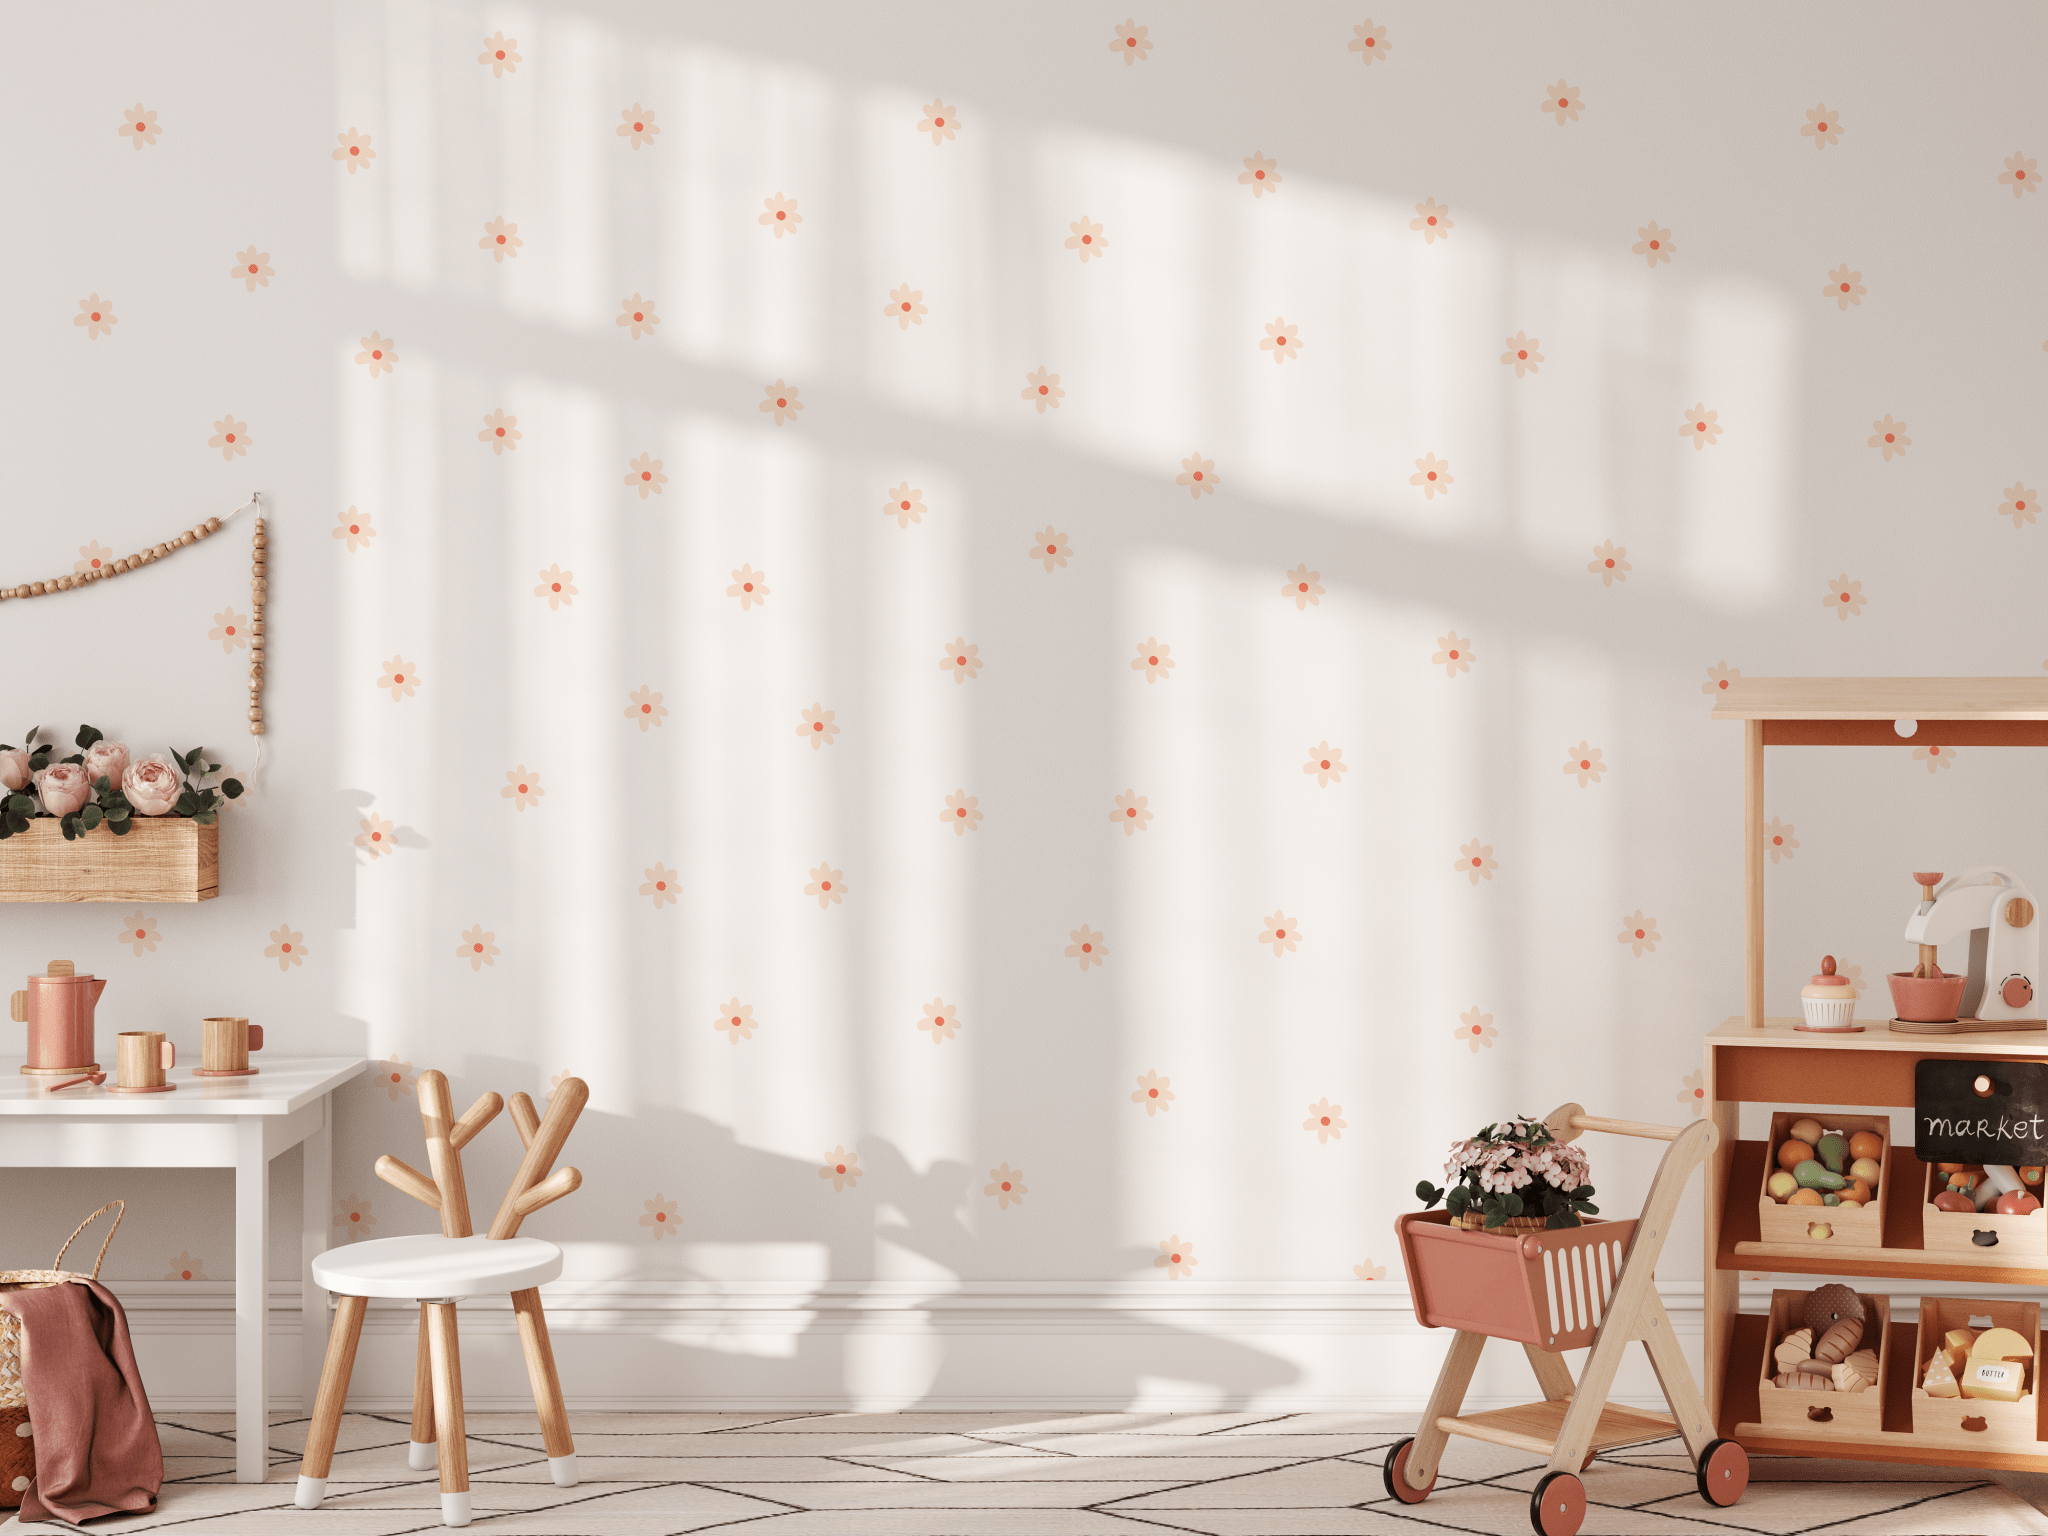 Child's play space with peel and stick small daisy wall stickers on the wall